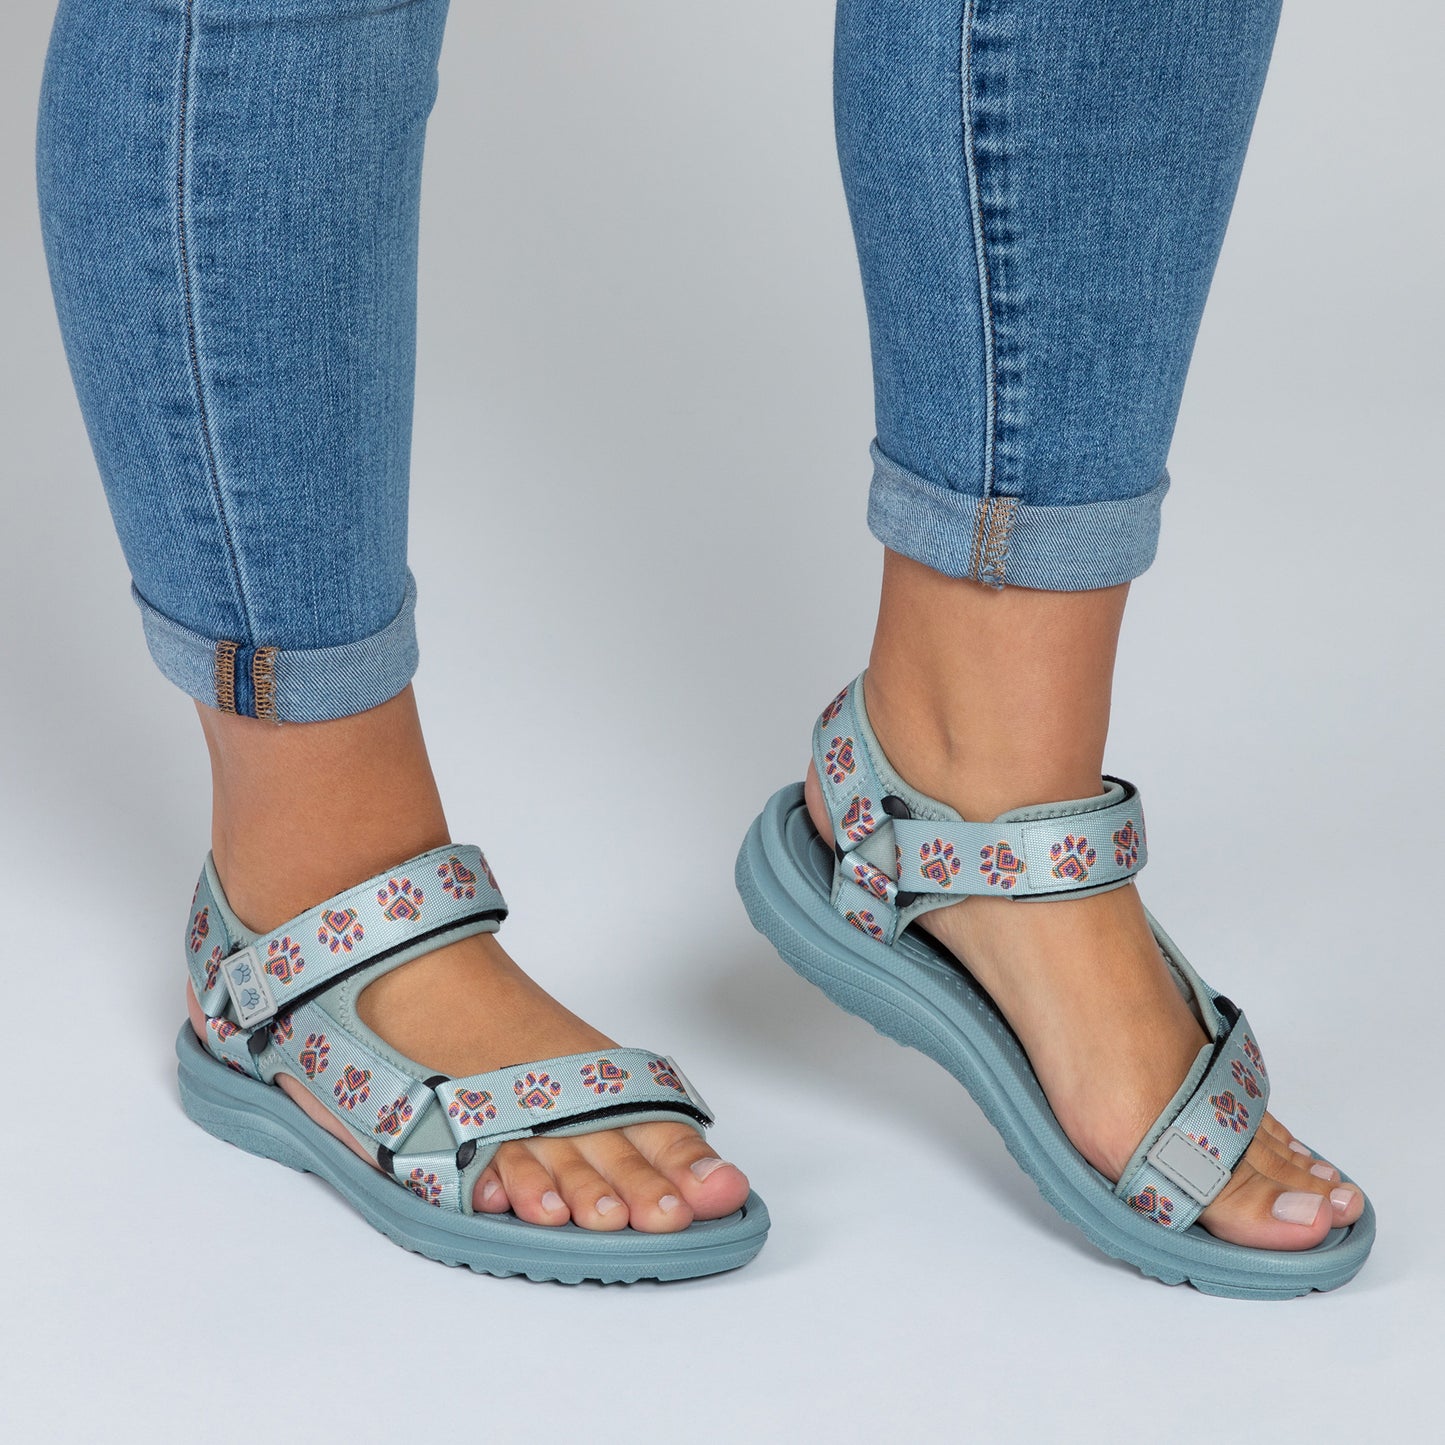 Walking Paws River Sandals